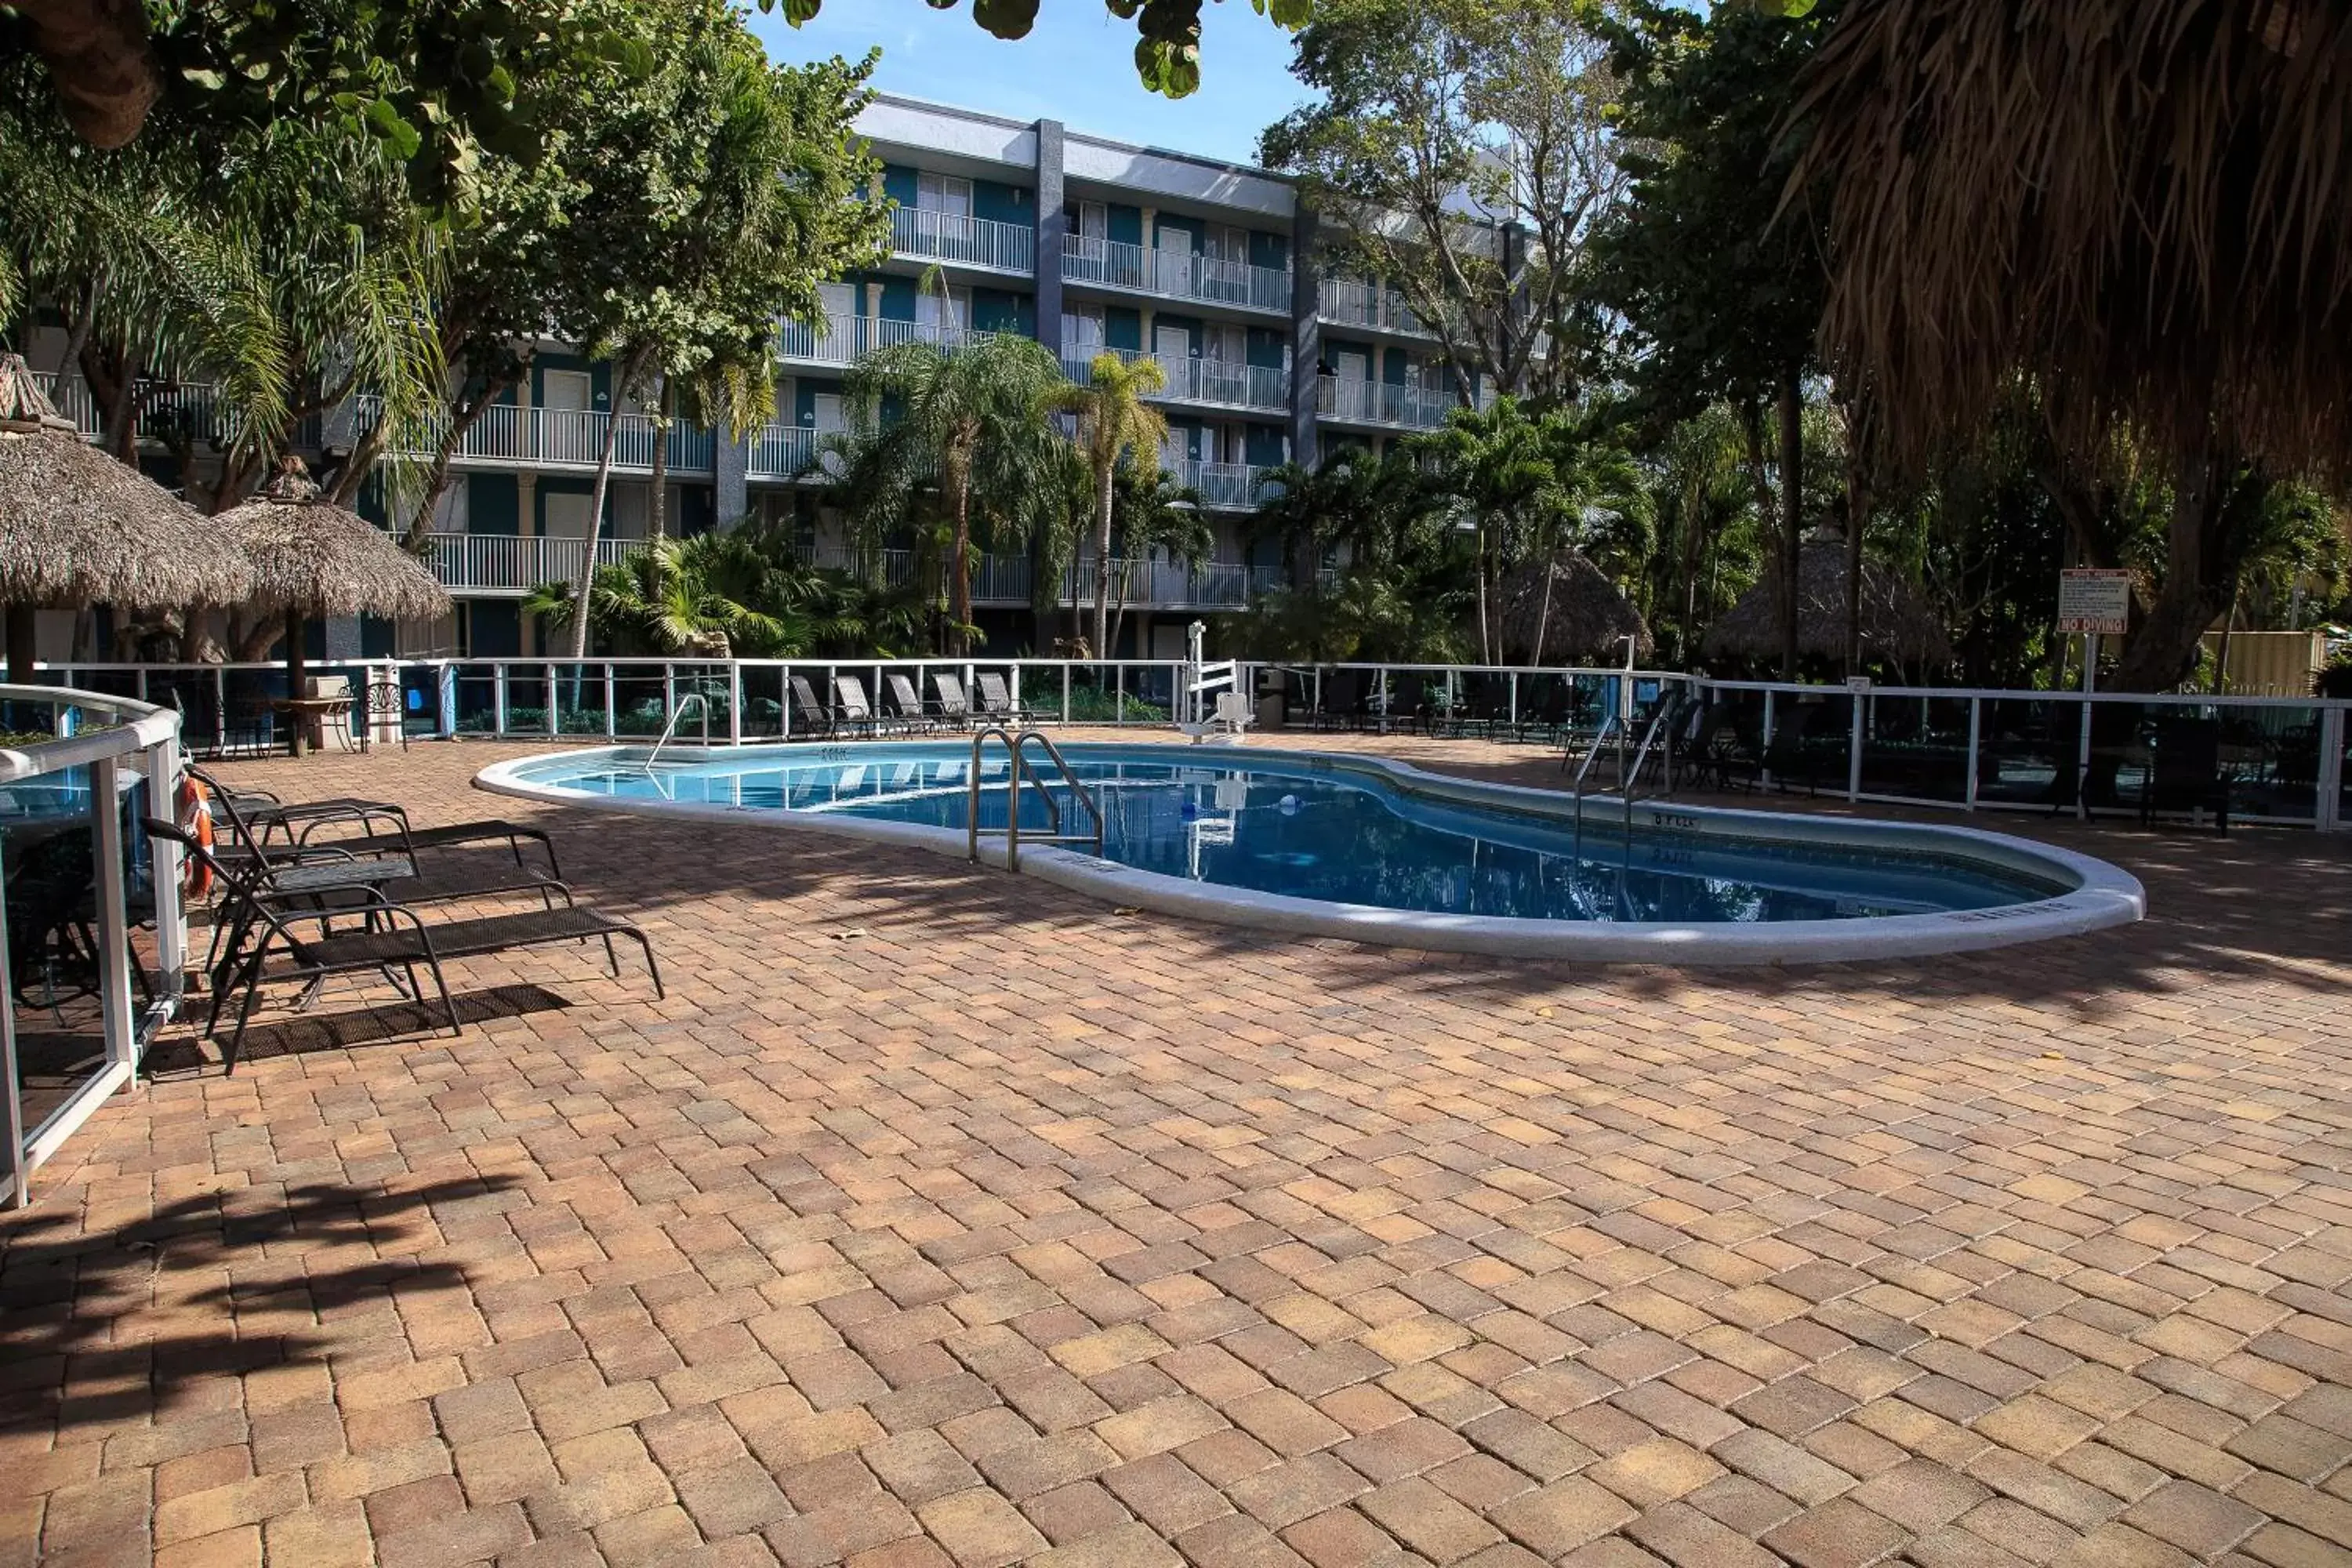 Property building, Swimming Pool in Fort Lauderdale Grand Hotel